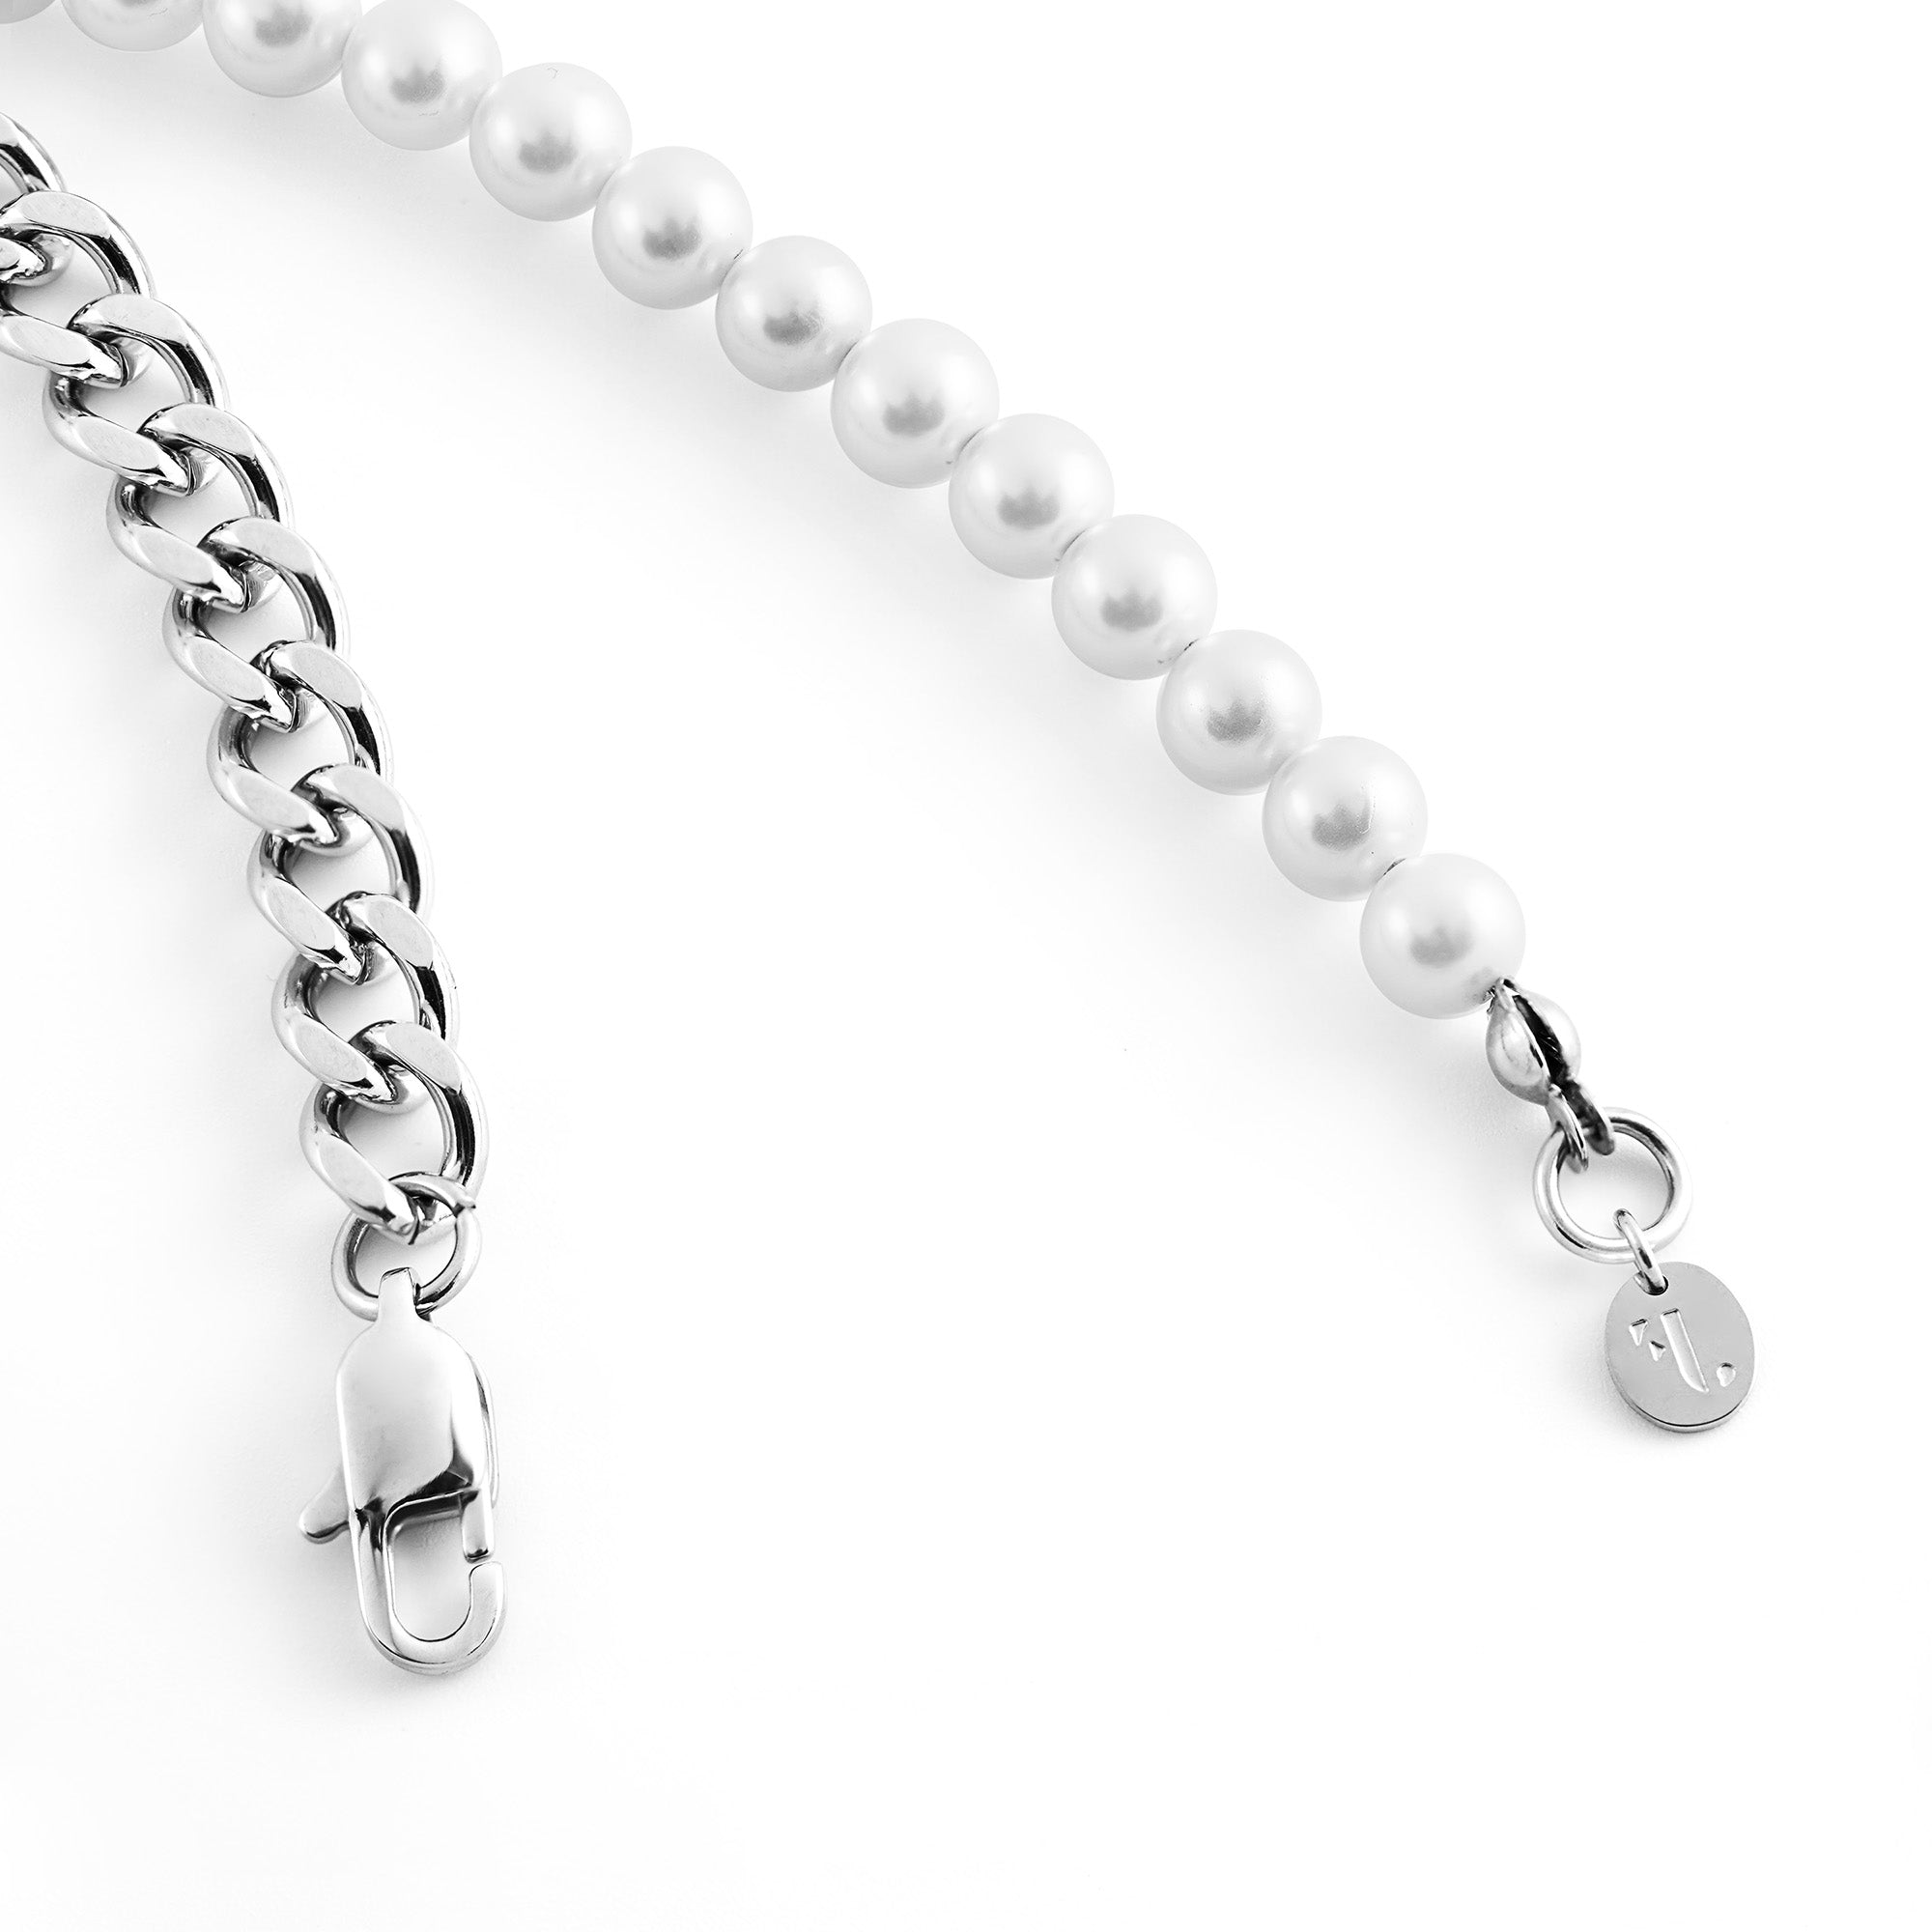 Volga women's bracelet by Five Jwlry, uniquely crafted with a combination of half silver Cuban chain and half white pearls, measuring 20cm or 23cm in length. Made from water-resistant 316L stainless steel. Hypoallergenic with a 2-year warranty.